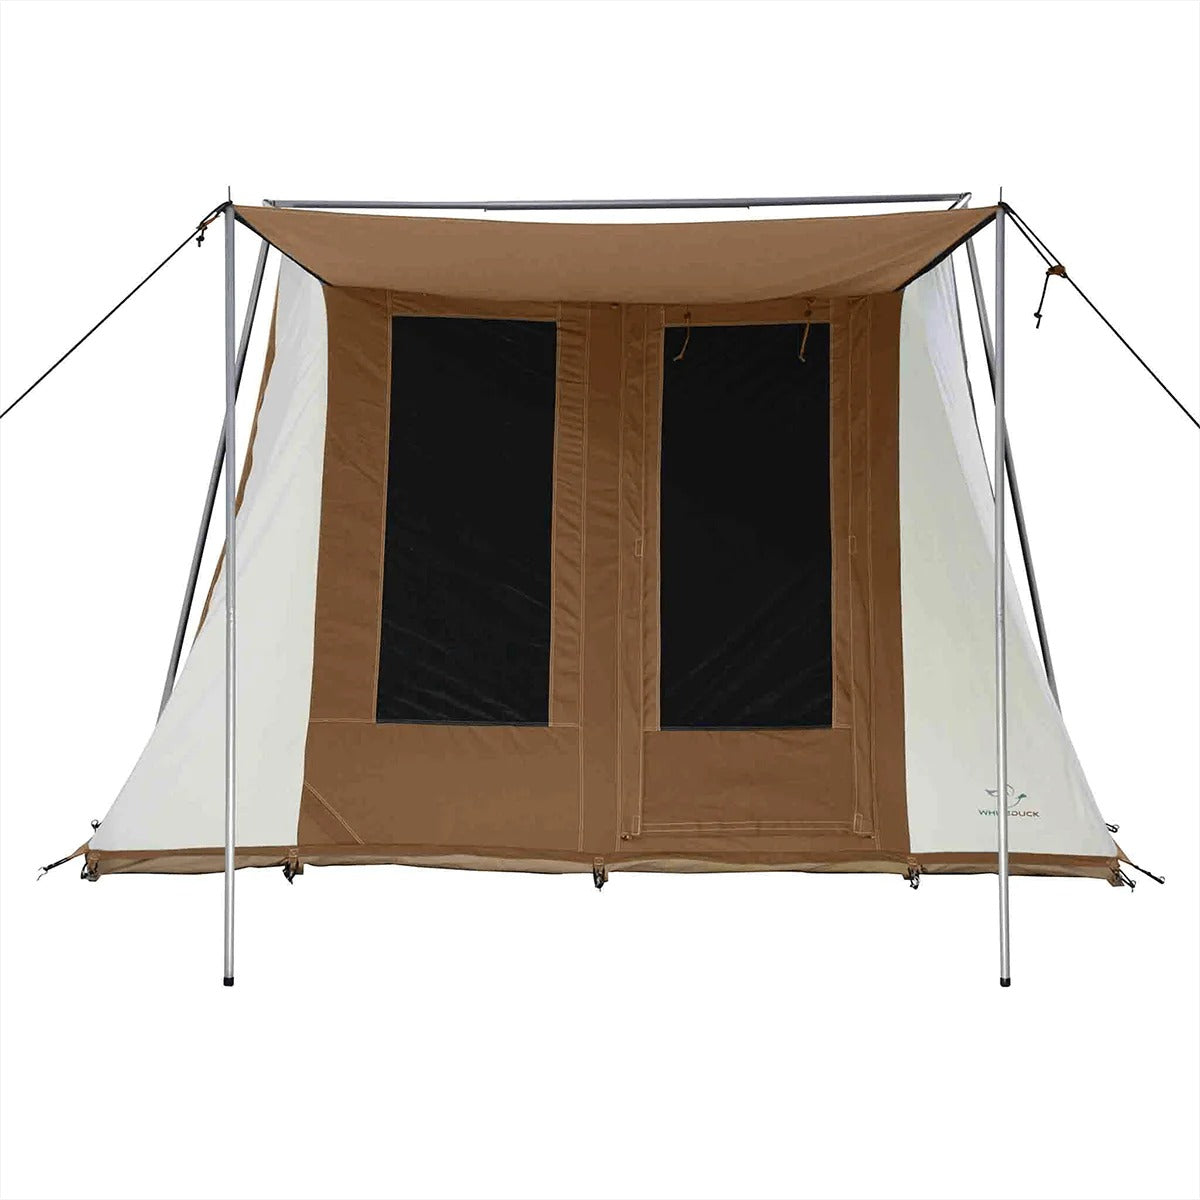 10'x10' [DeLuxe] Prota Canvas Cabin Tent - White Duck Outdoors – DeLuxe Dome